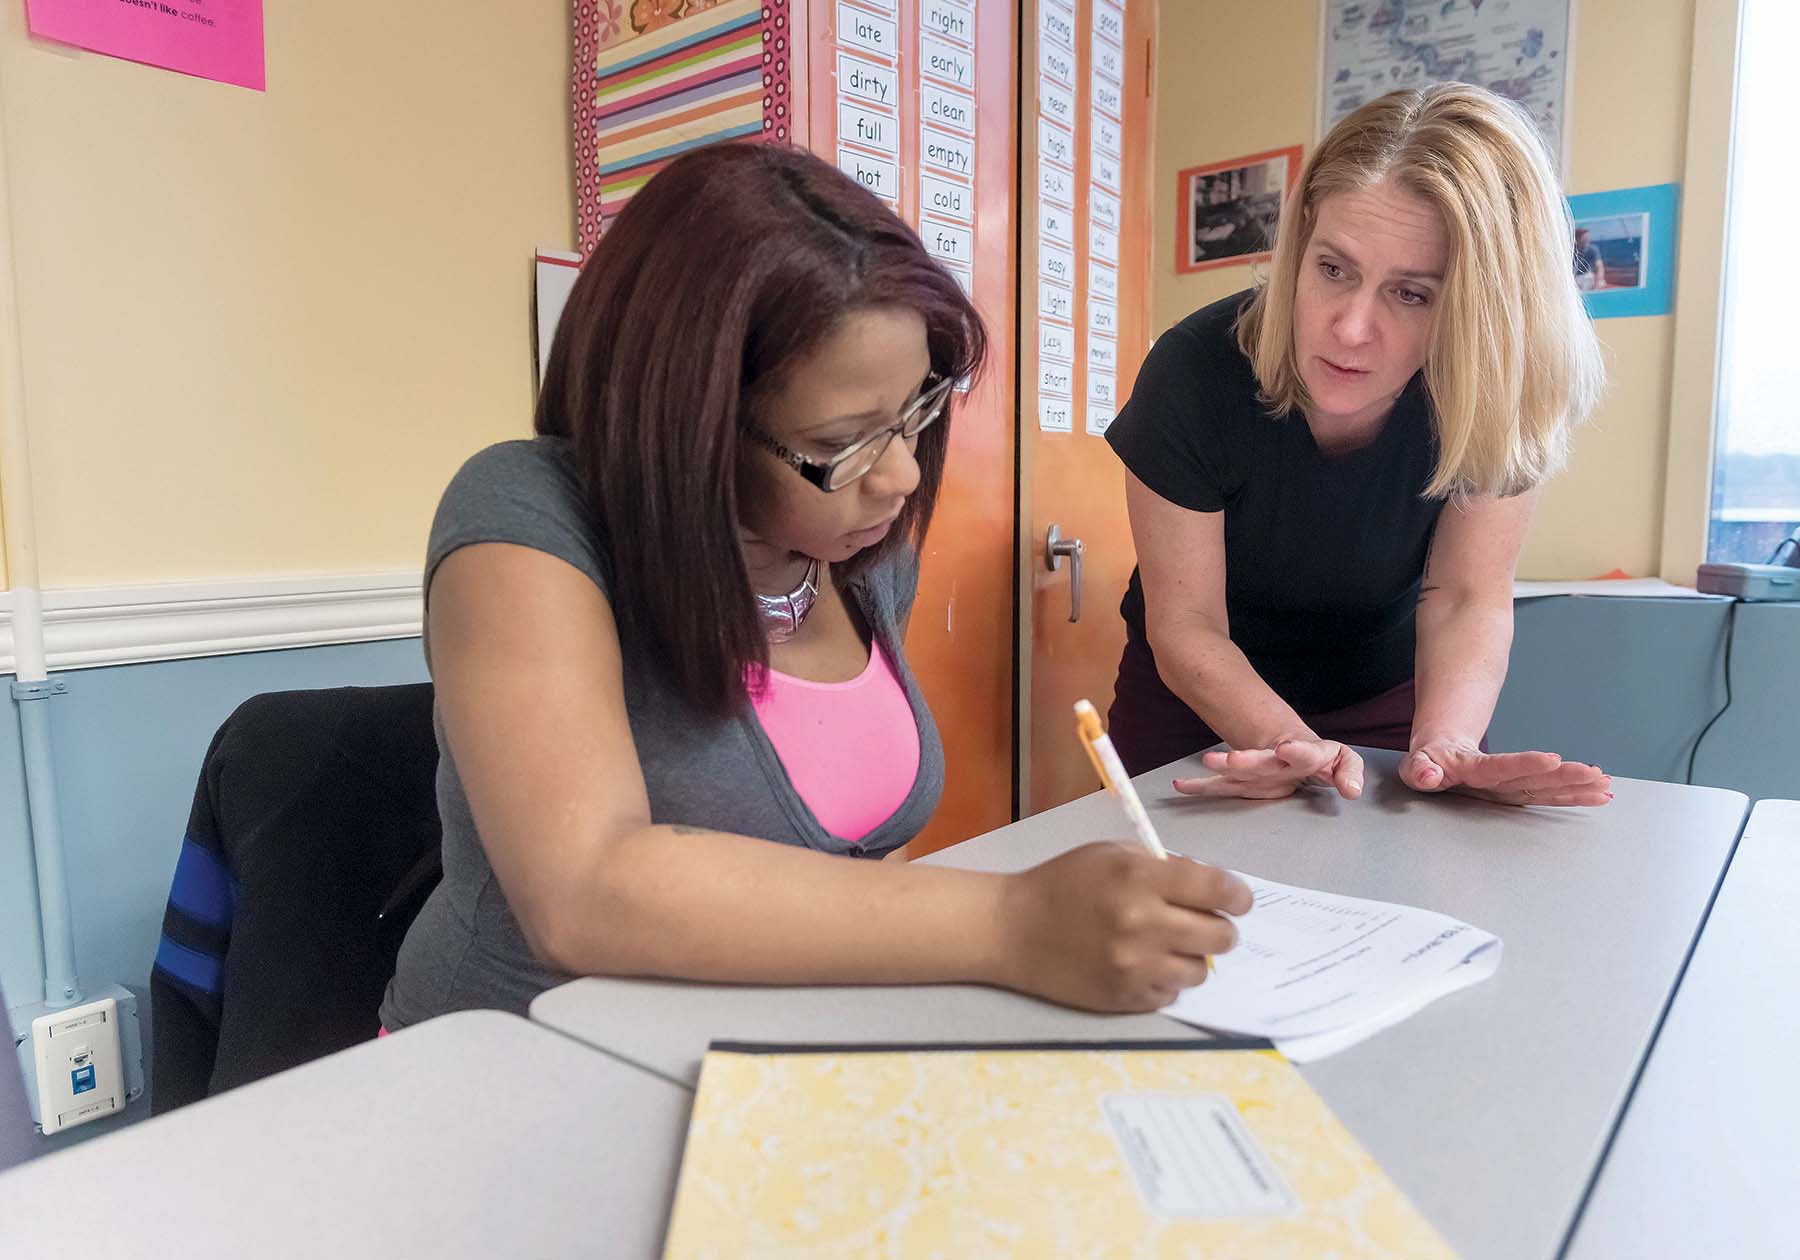 HELPING HAND: Amanda Hanley, right, transition councilor for Rhode Island Regional Adult Learning, assists Esther Alvarez, of Woonsocket, as part of an adult-education class for workers learning English skills. / PBN PHOTO/MICHAEL SALERNO